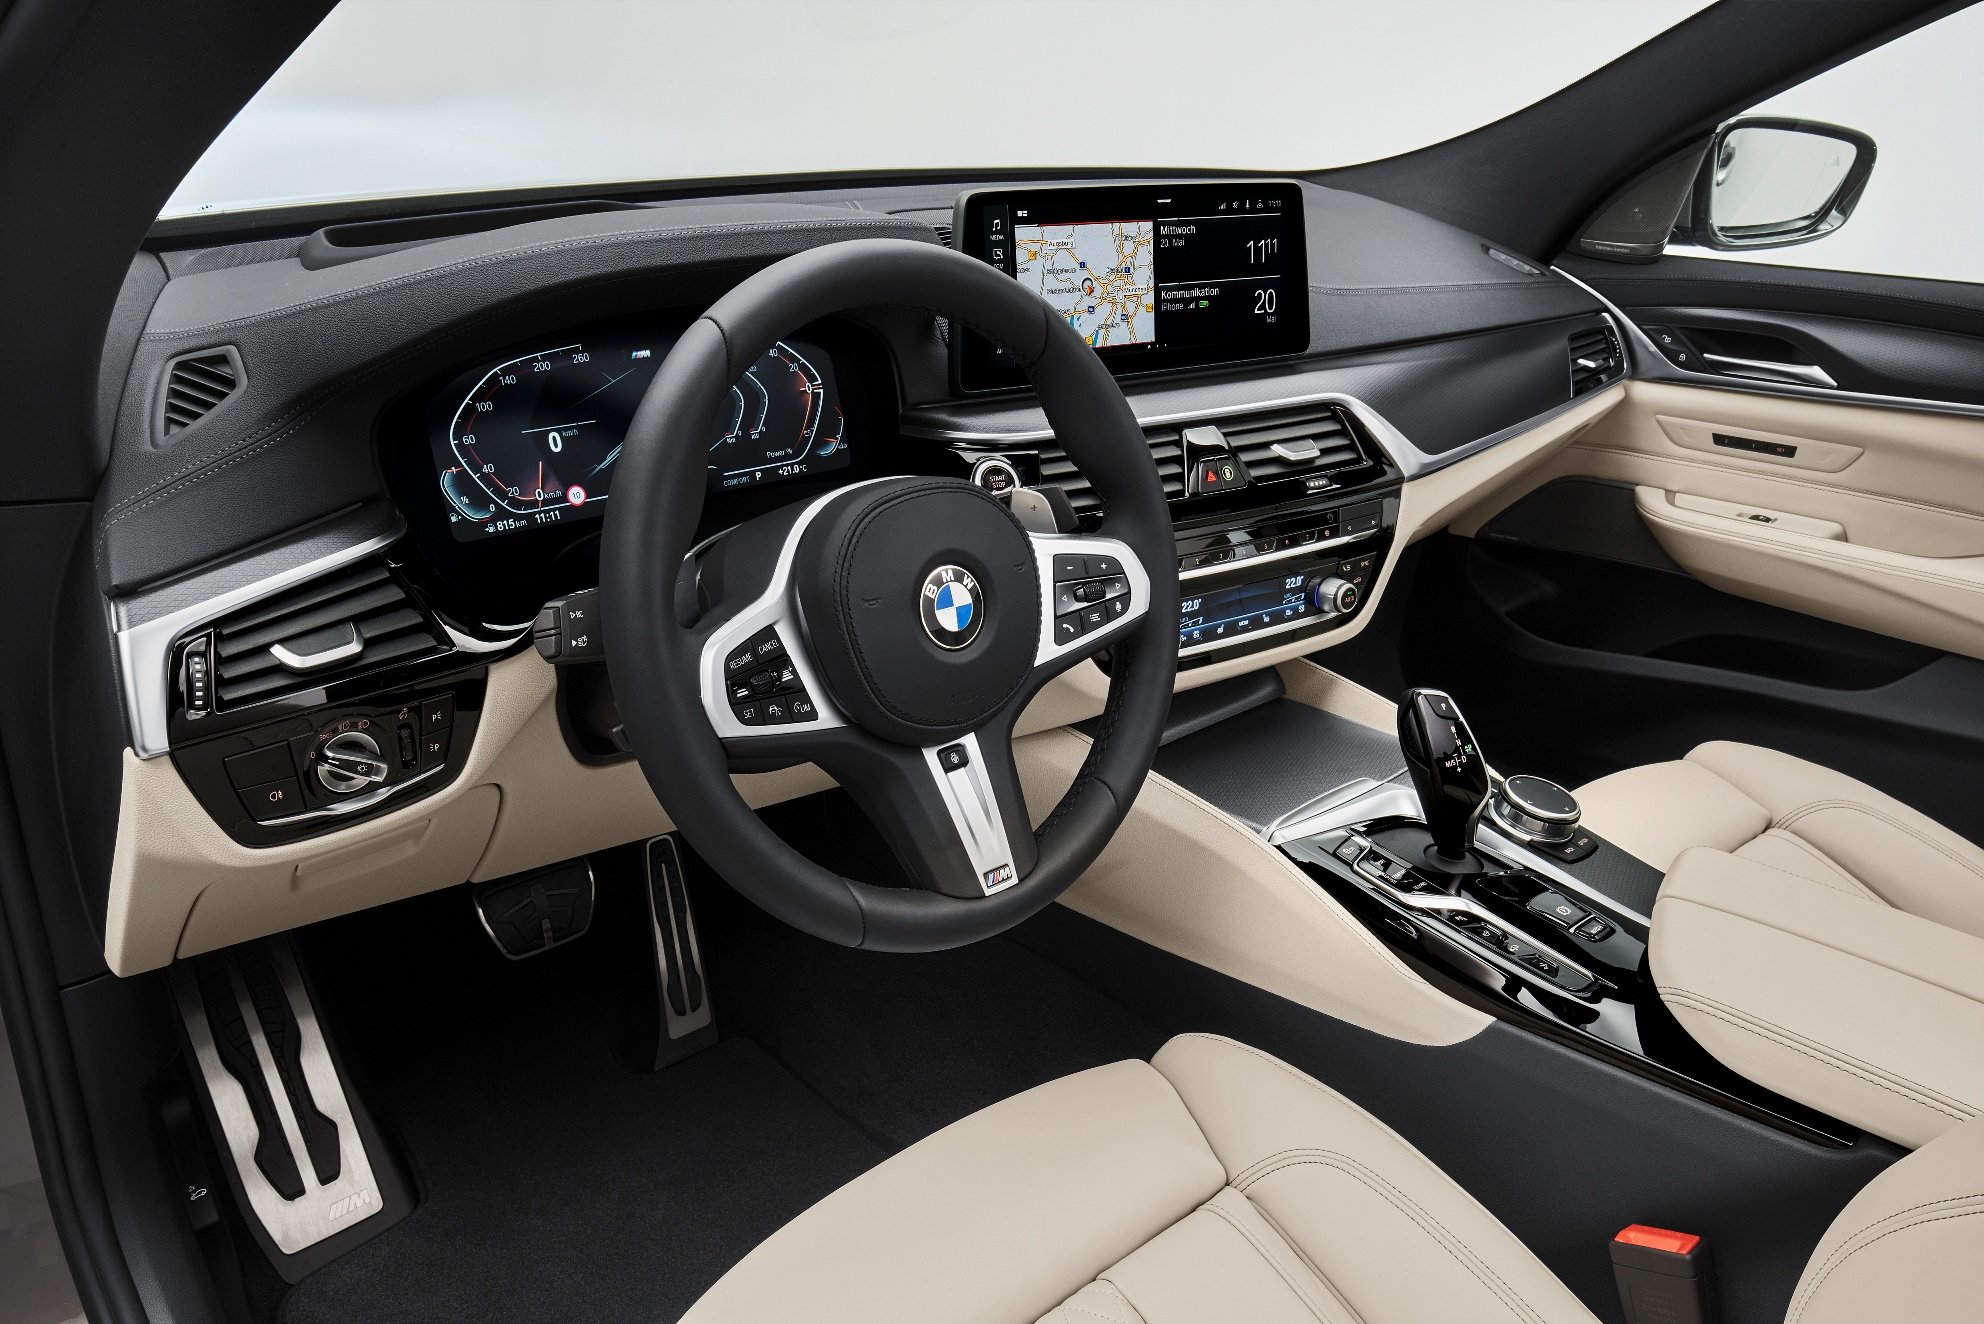 https://autoroad.cz/pictures/photo/2020/05/27/p90389879-highres-the-new-bmw-640i-xdr-166d69a5da.jpg